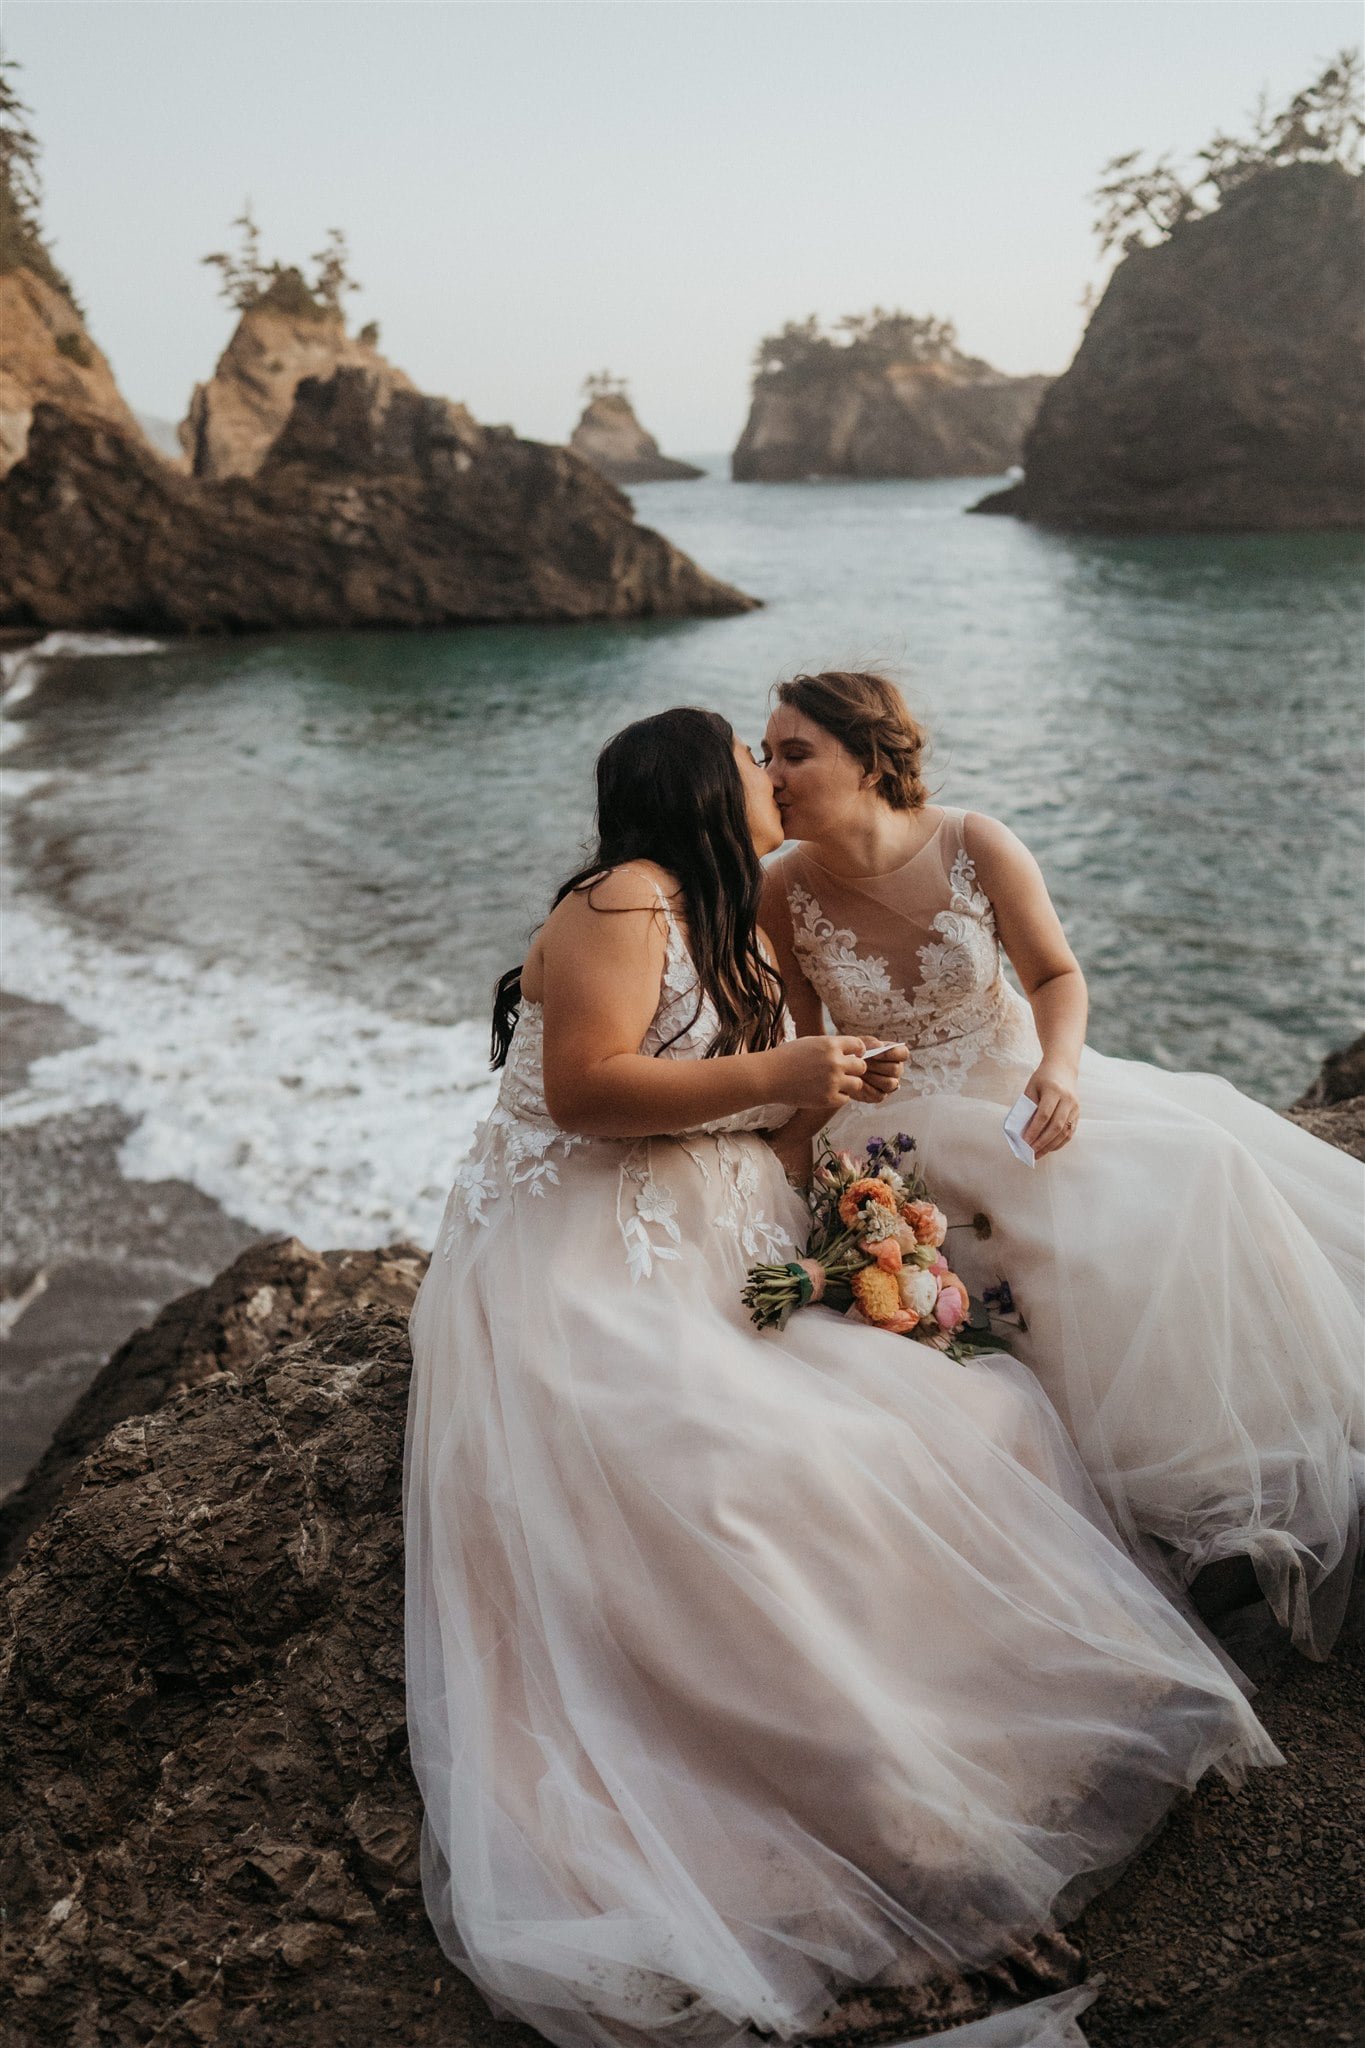 Brides reading letters from loved ones during their elopement at Secret Beach